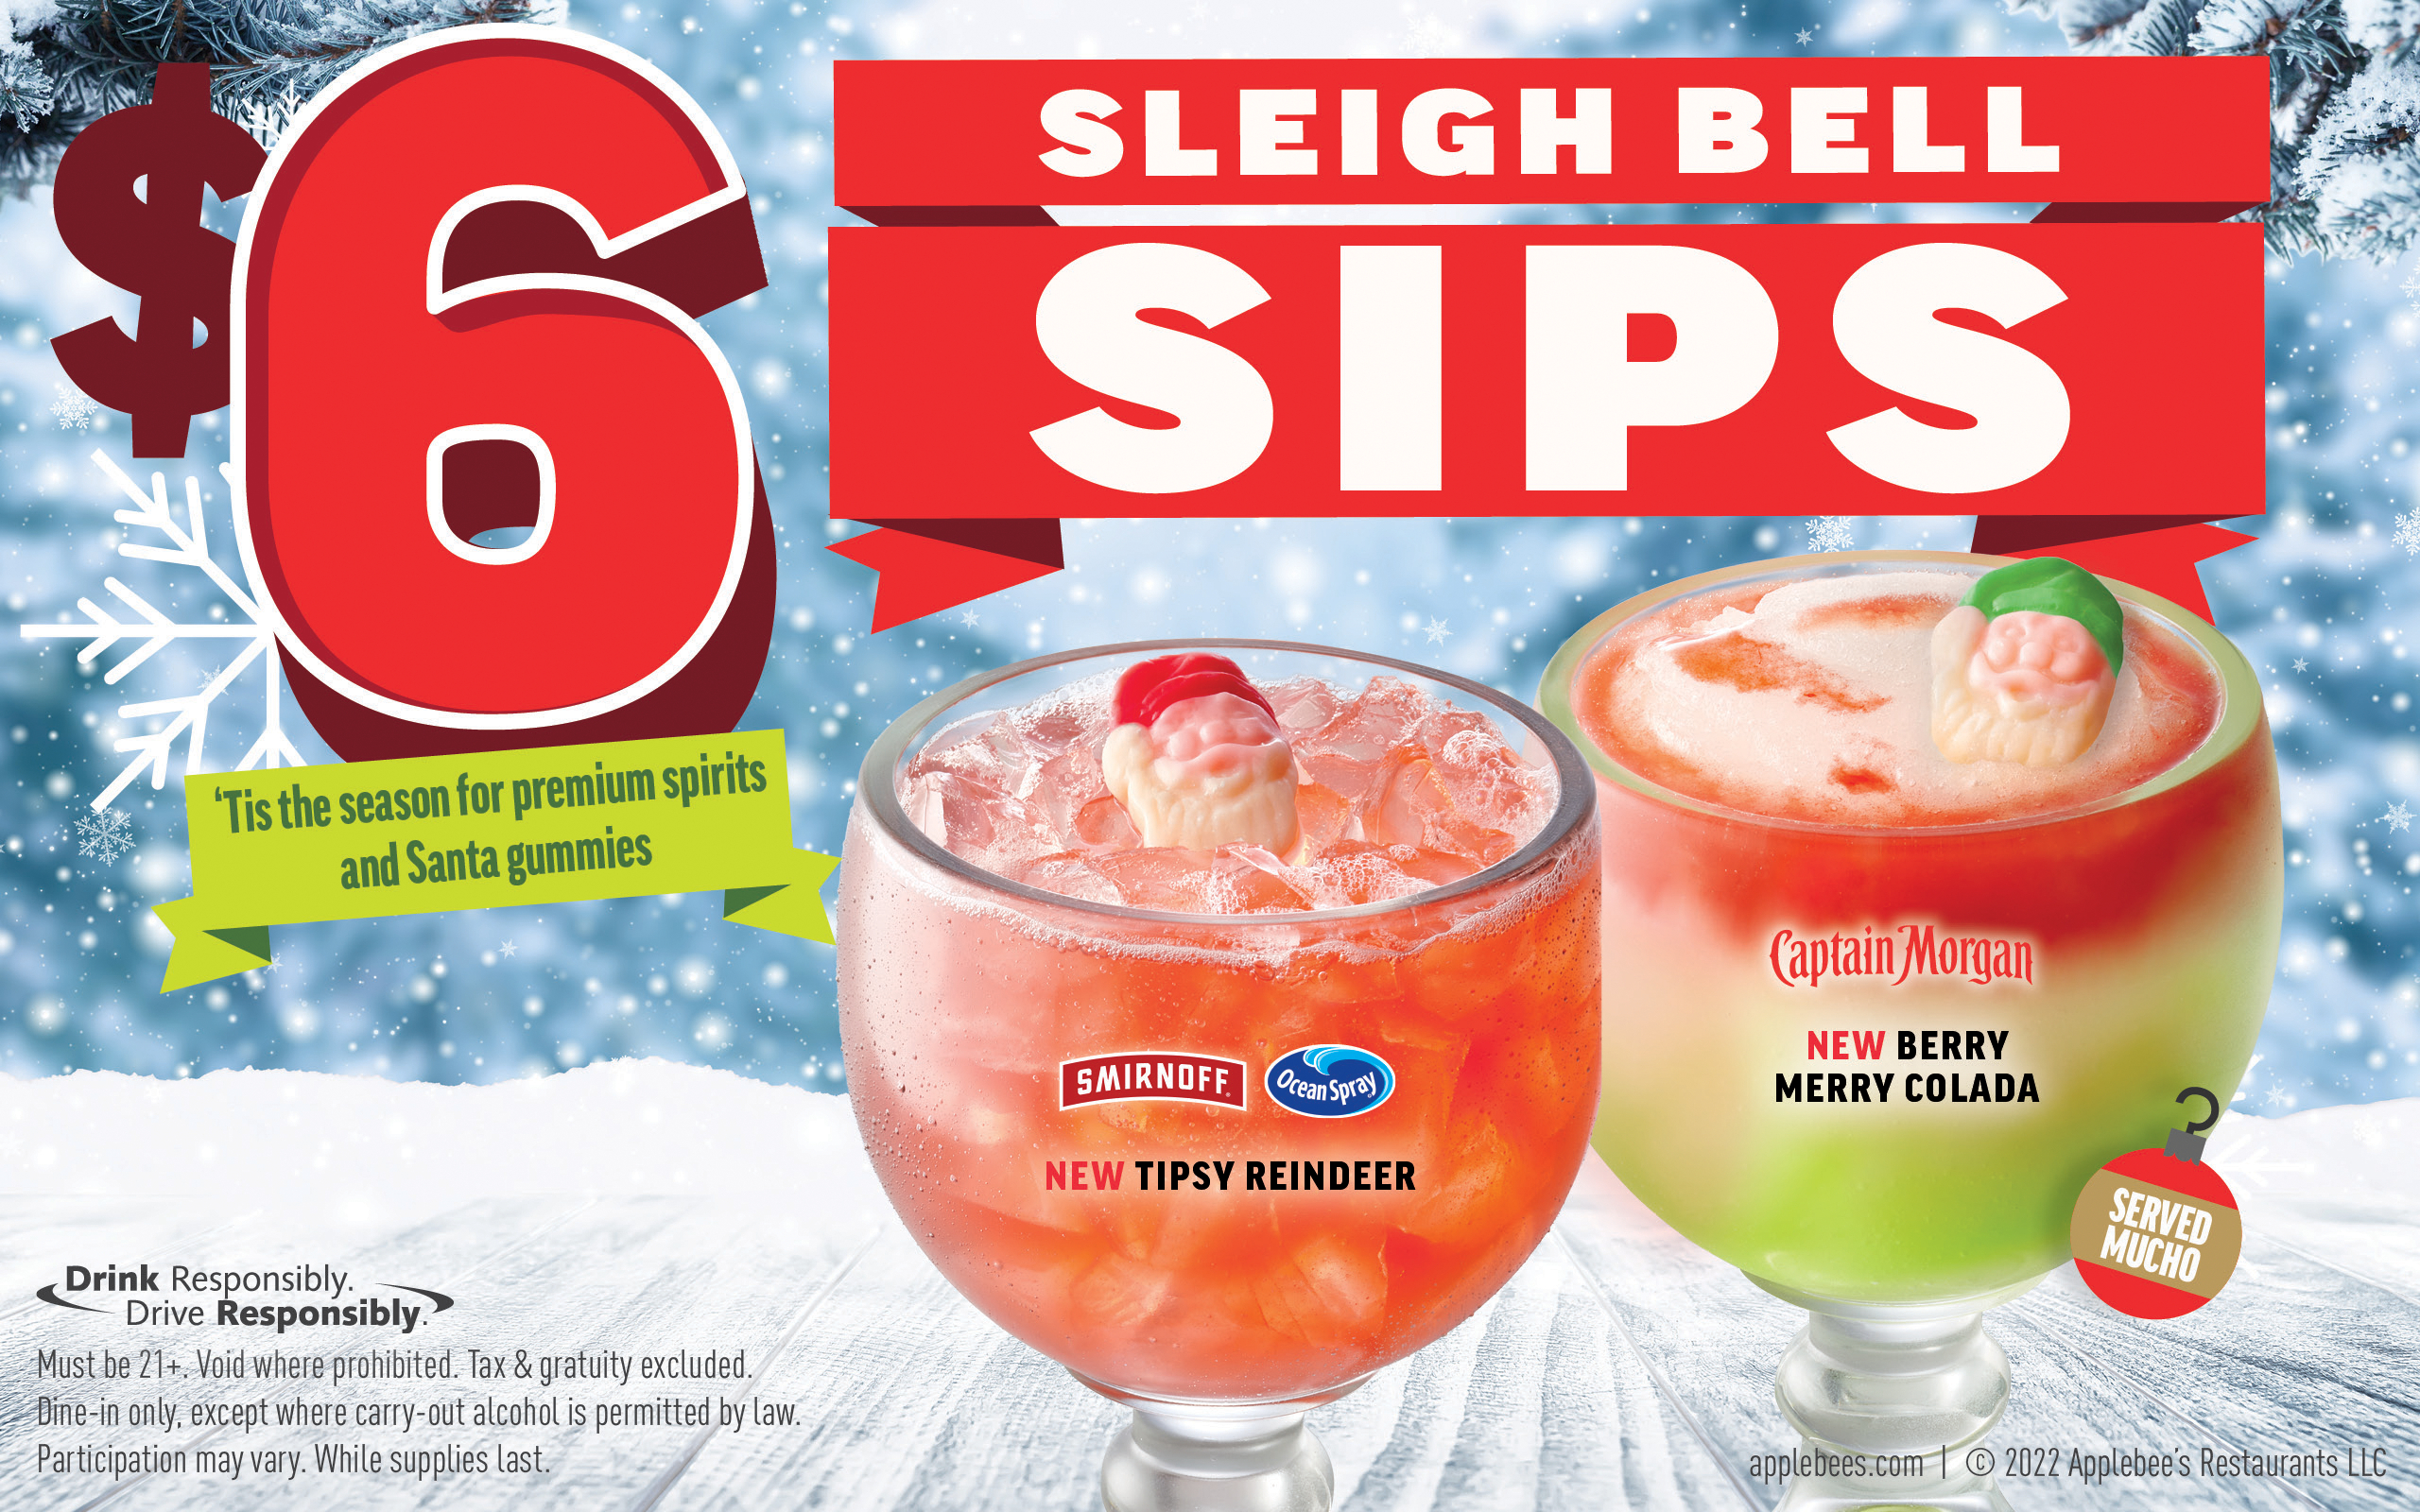 May Your Days Be Merry with Applebee's Sleigh Bell Sips